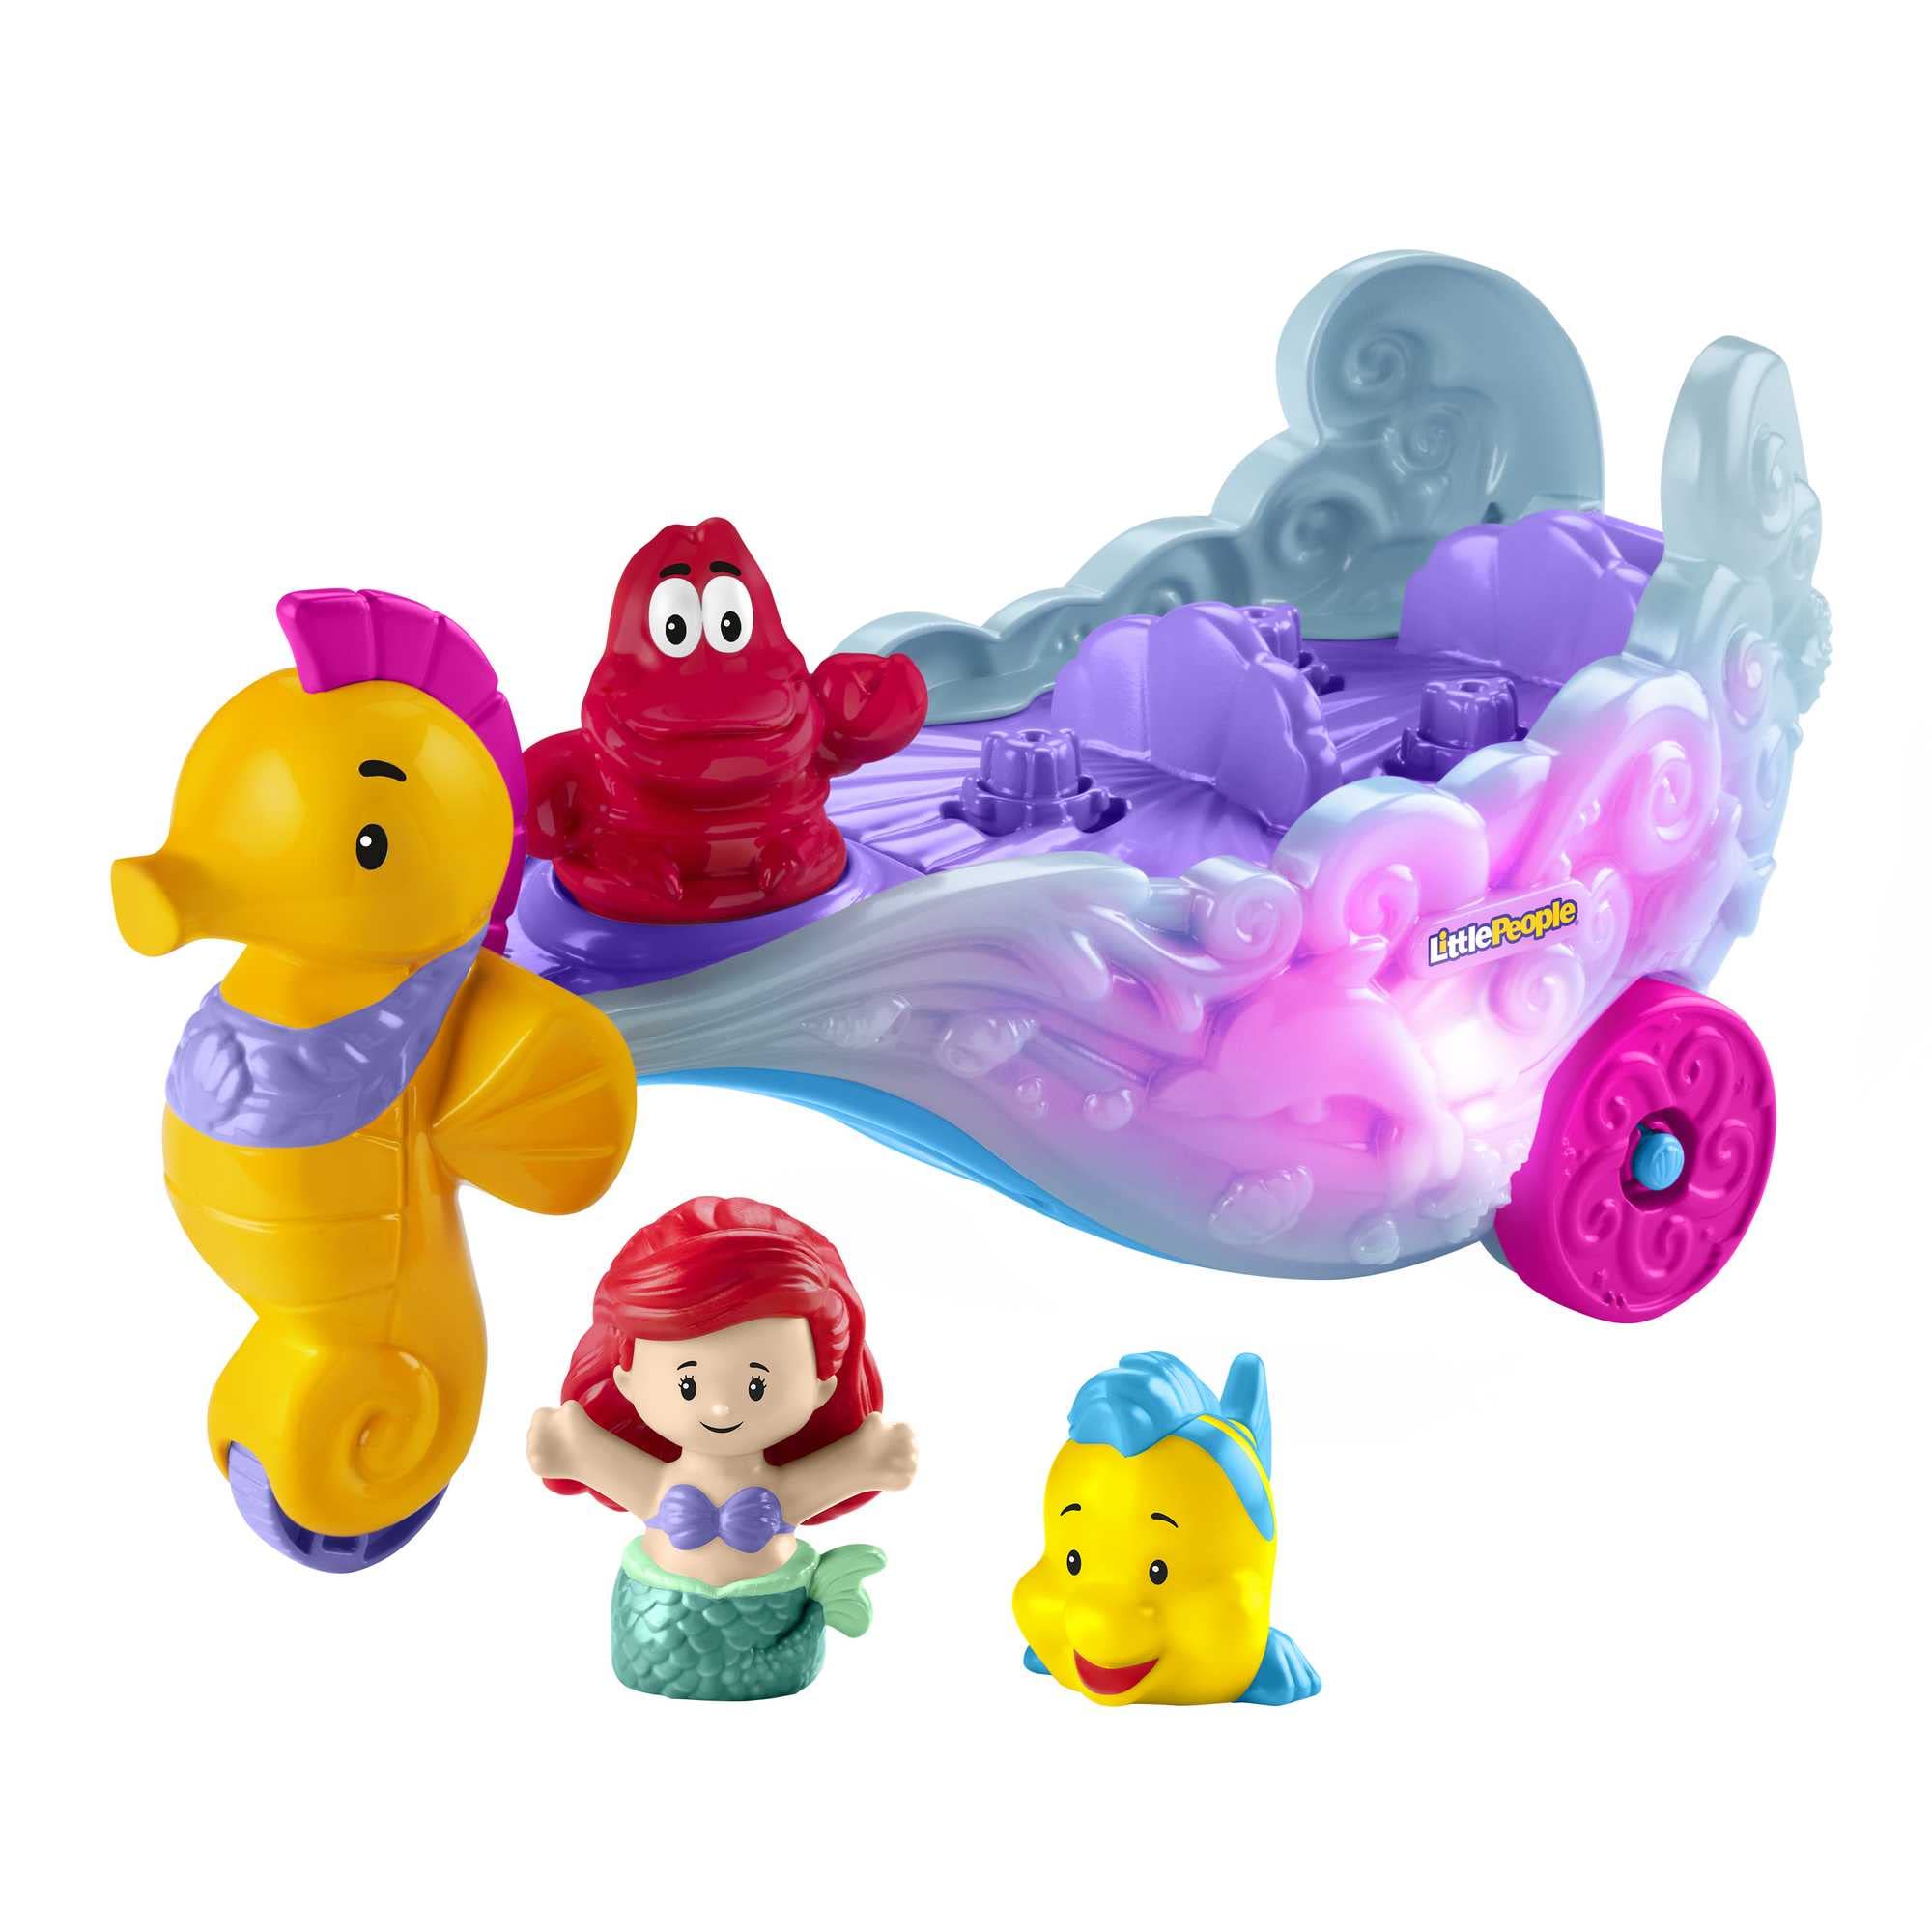 Fisher-Price Disney Princess Toddler Toy Light-Up Sea Carriage Musical Vehicle with Ariel & Flounder Figures for Ages 18+ Months